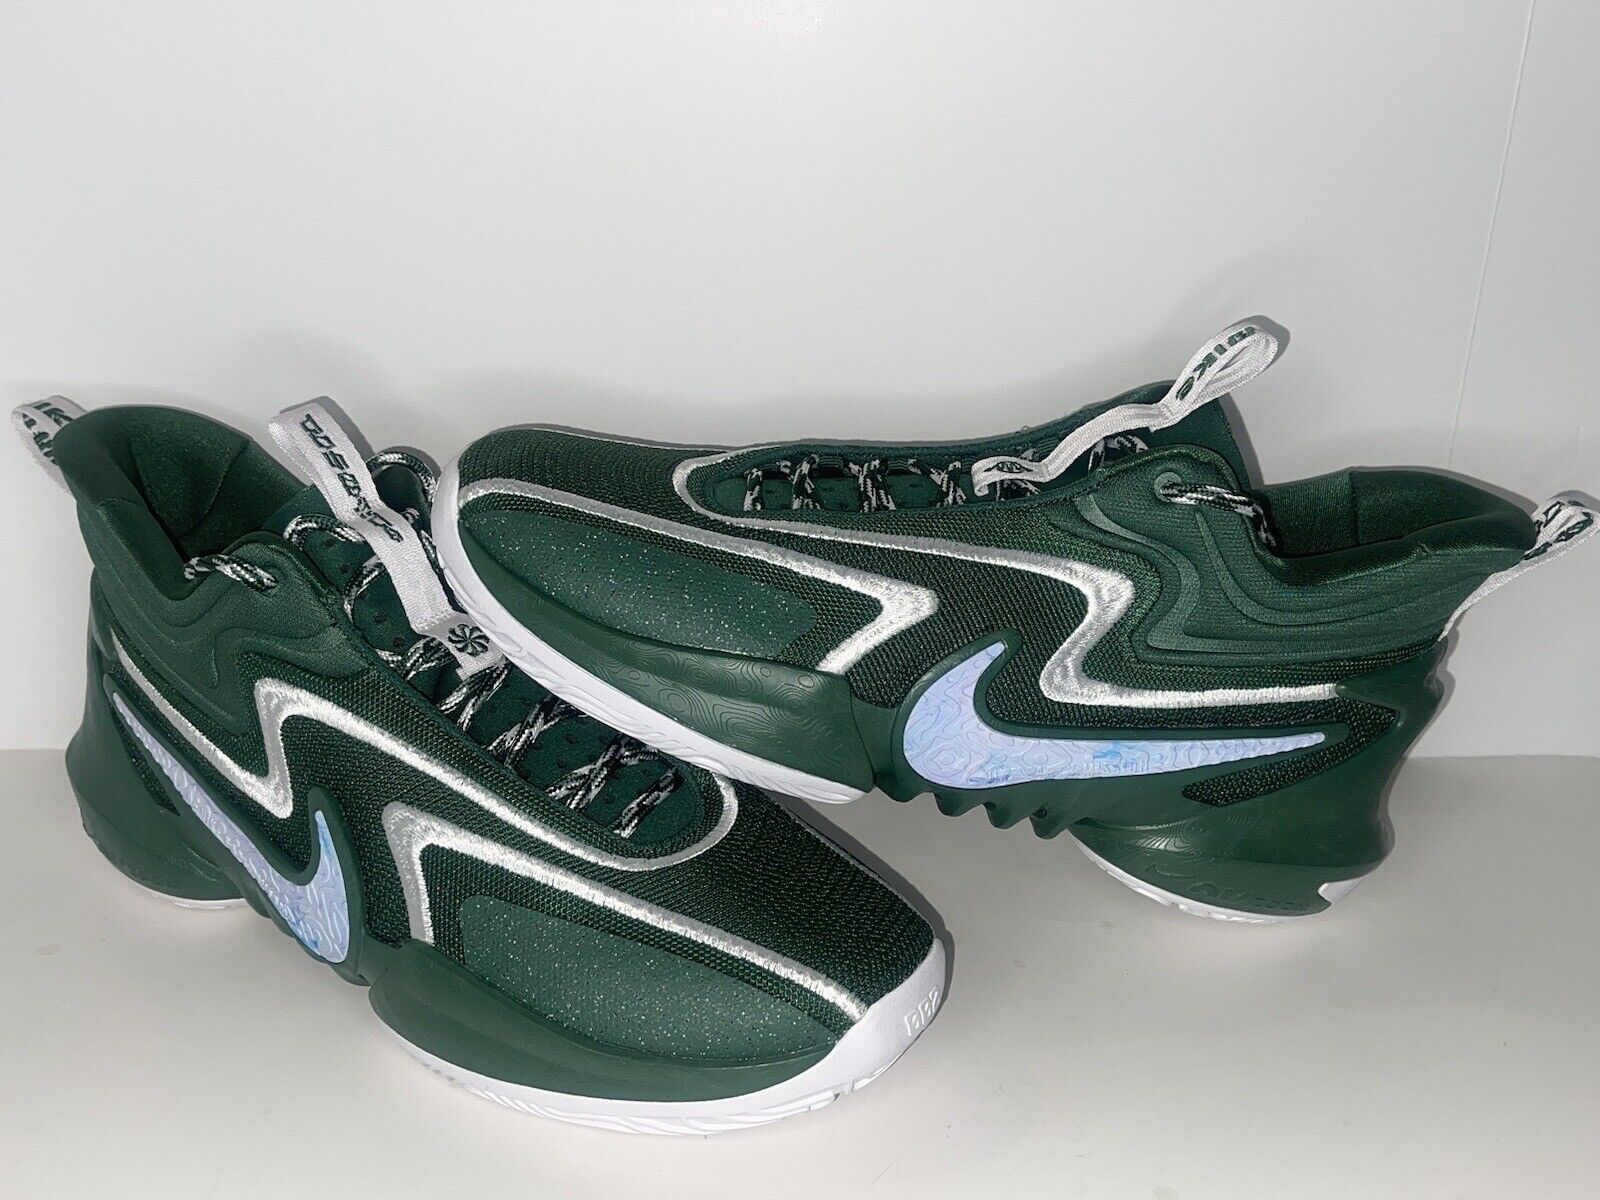 Clever NIKE MICHIGAN STATE SPARTANS MSU  TEAM ISSUED COSMIC UNITY 2 BASKETBALL SHOES 13 on eBay